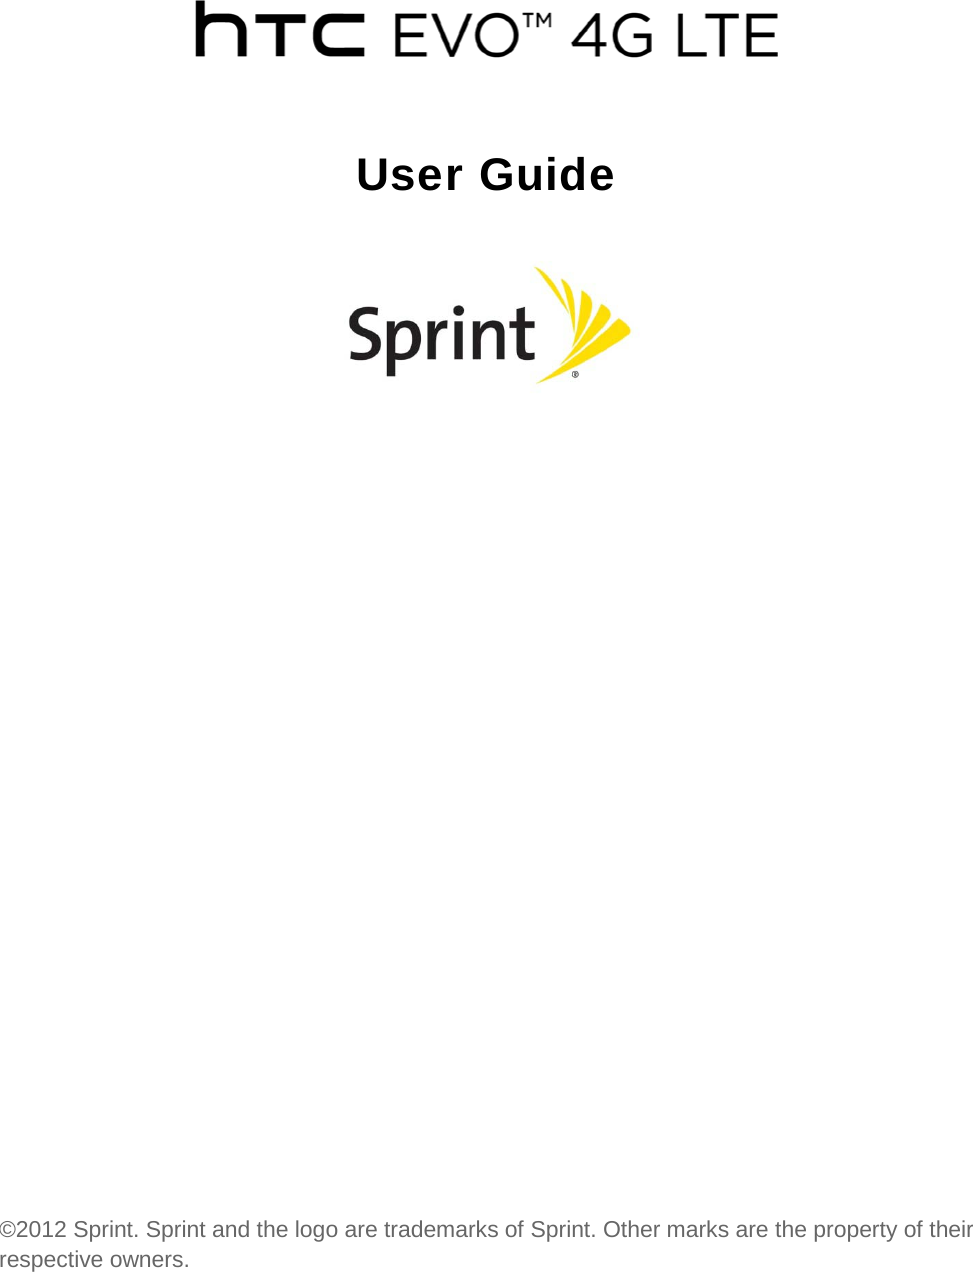    User Guide                 ©2012 Sprint. Sprint and the logo are trademarks of Sprint. Other marks are the property of their respective owners.  